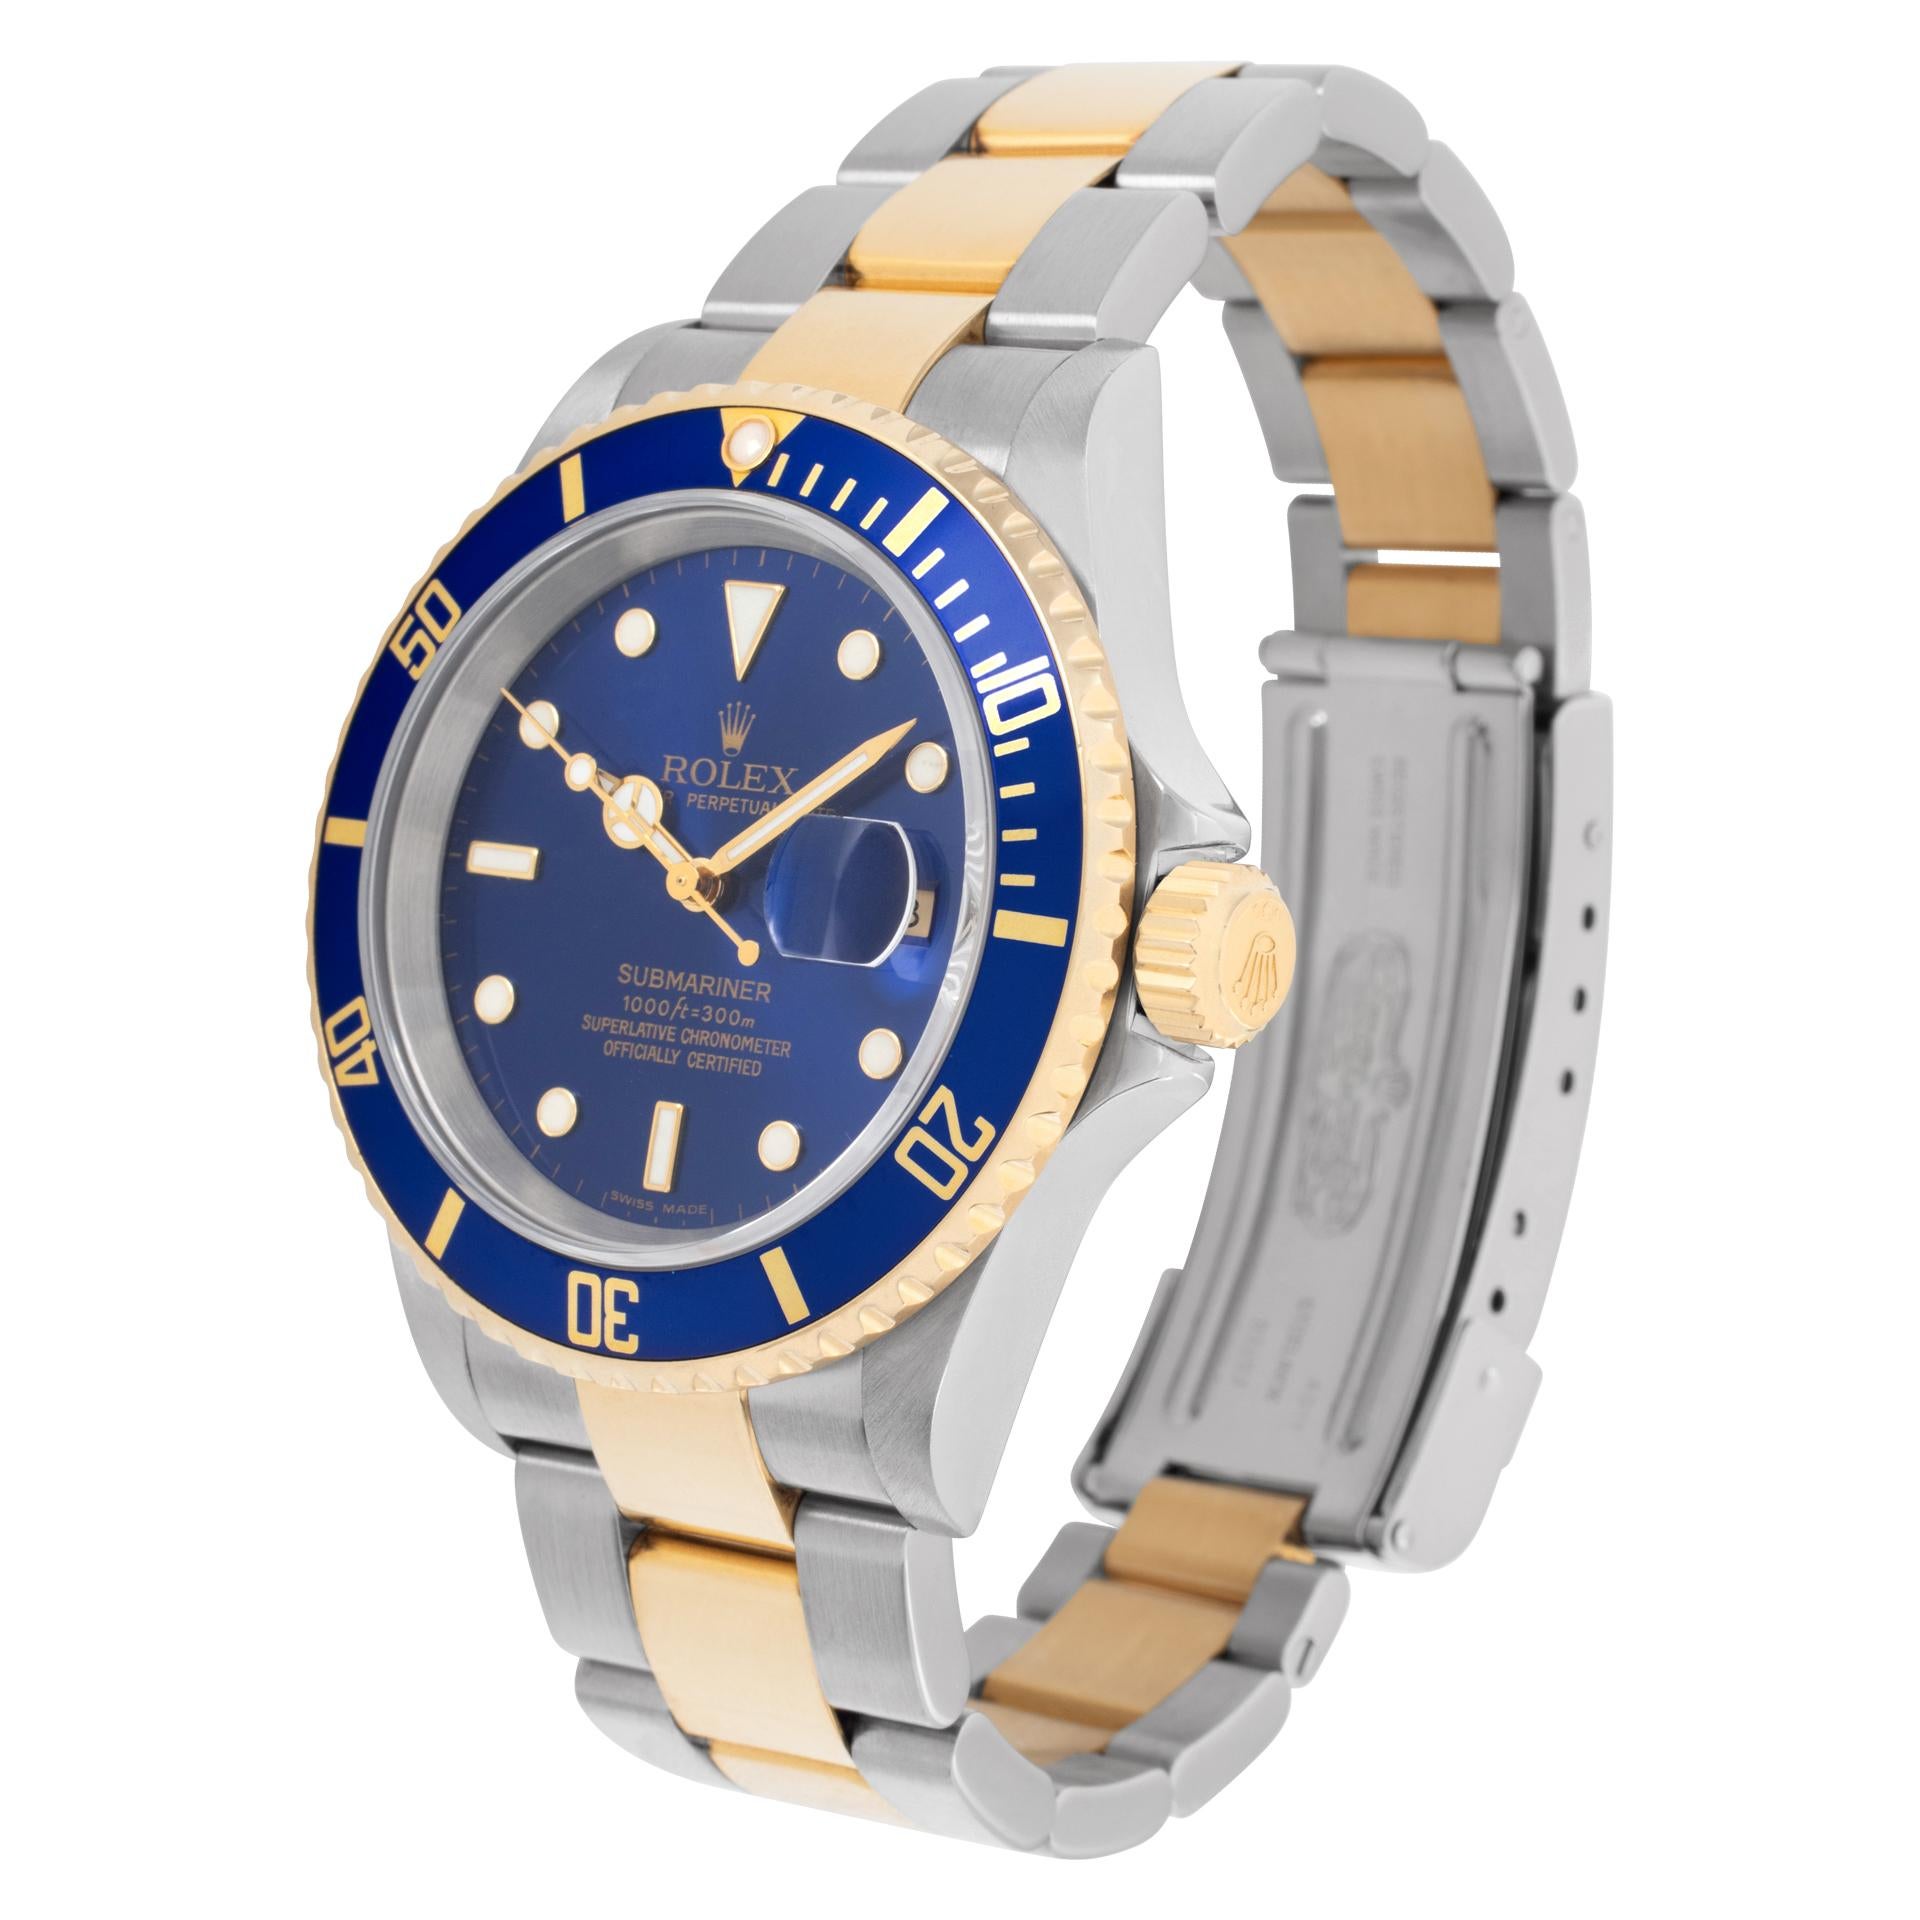 Rolex Submariner in 18k & stainless steel and blue dial wth luminescent stick-dot hour markers. Auto w/ sweep seconds and date. 40 mm case size. **Bank wire only at this price** Ref 16613T. Circa 2005. Fine Pre-owned Rolex Watch. Certified preowned